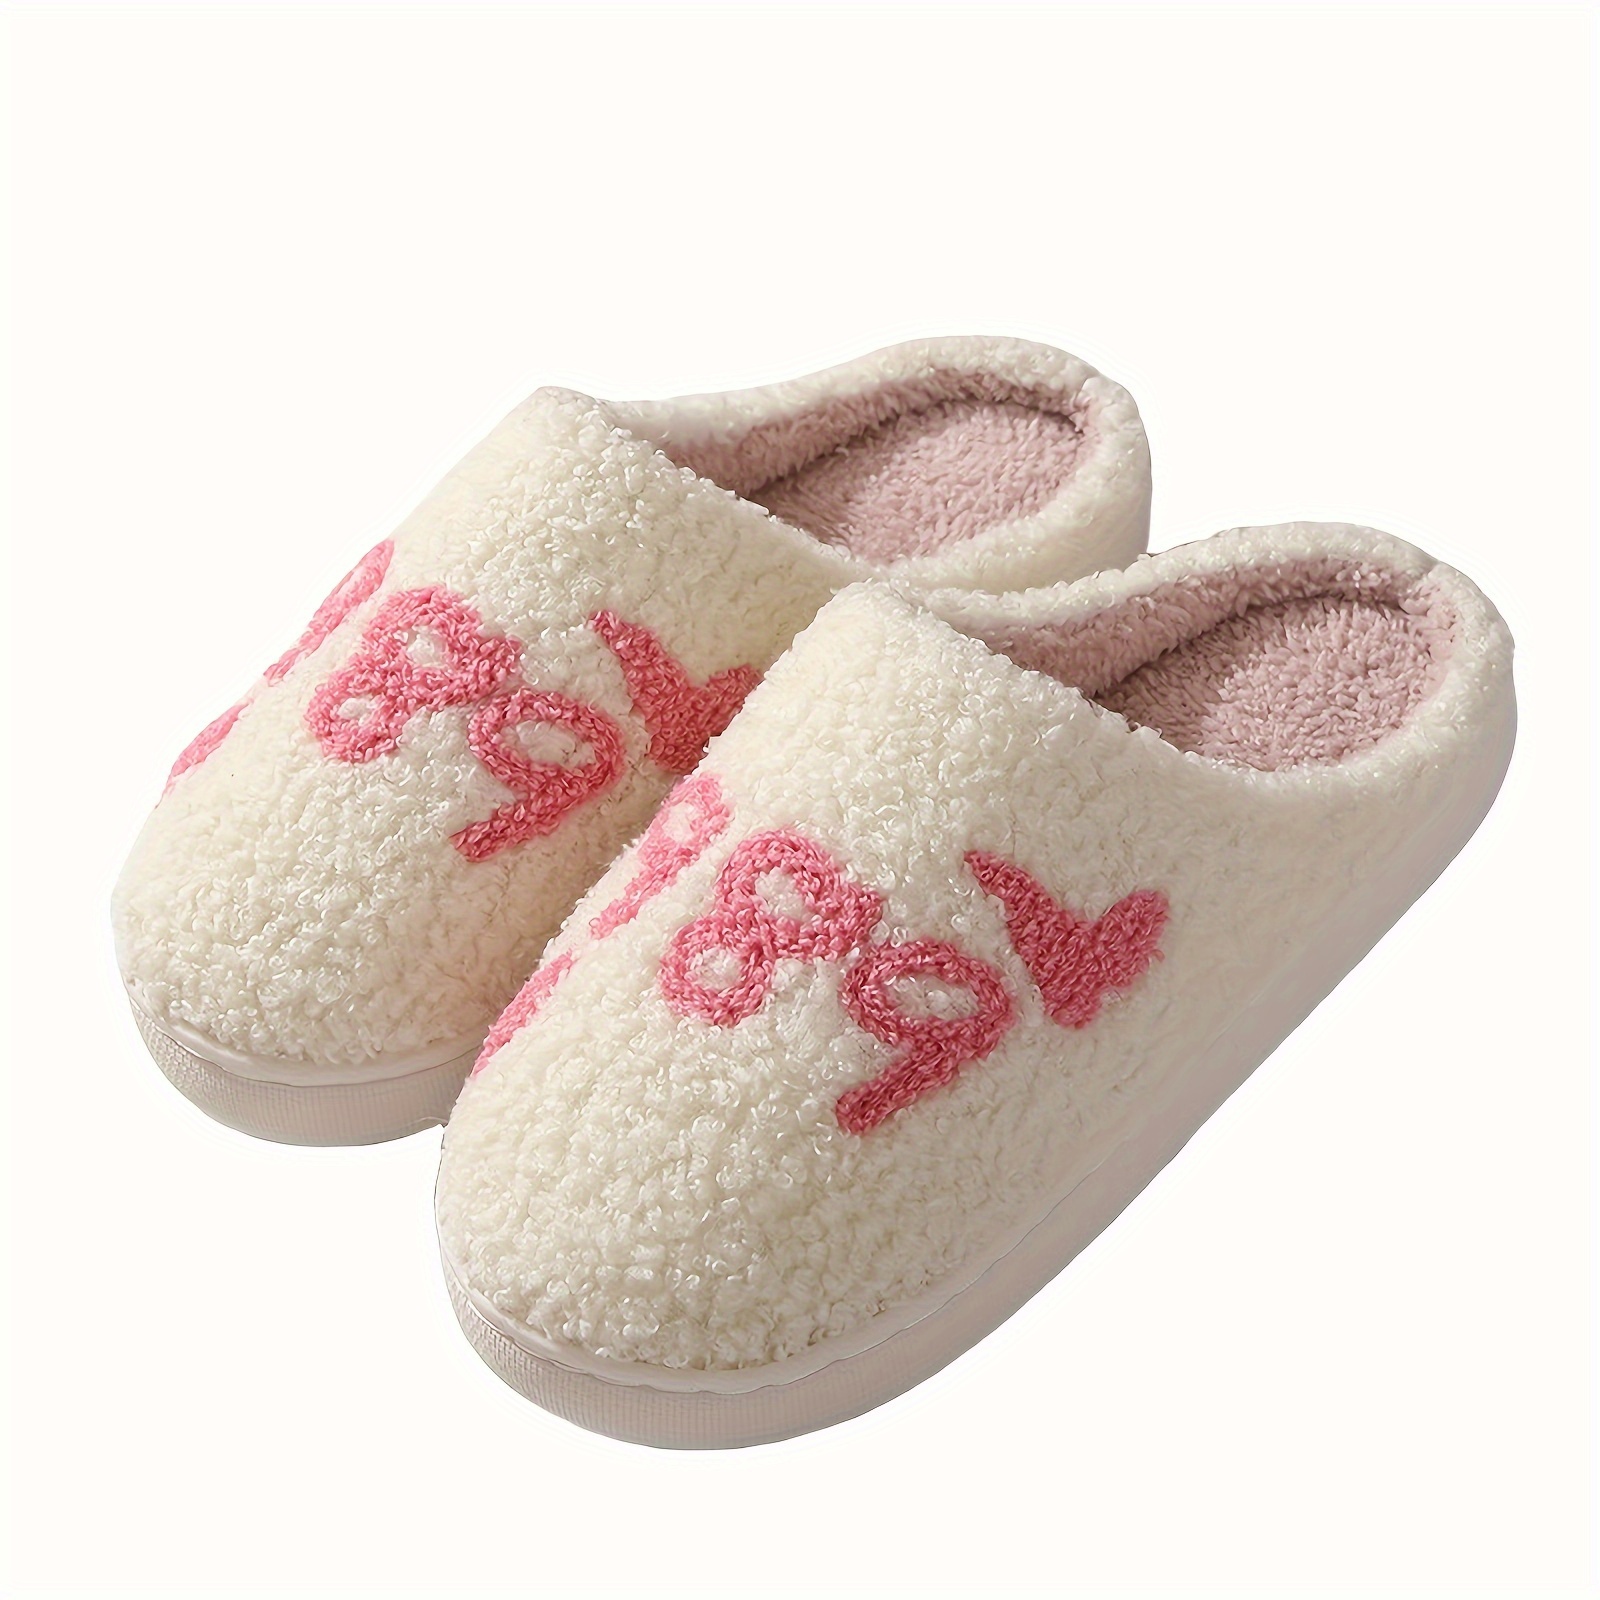 

Fuzzy Memory Foam Slippers, Slip-on House Warm Plush Indoor Slippers With Cute Embroidery, Comfy Bedroom Slippers